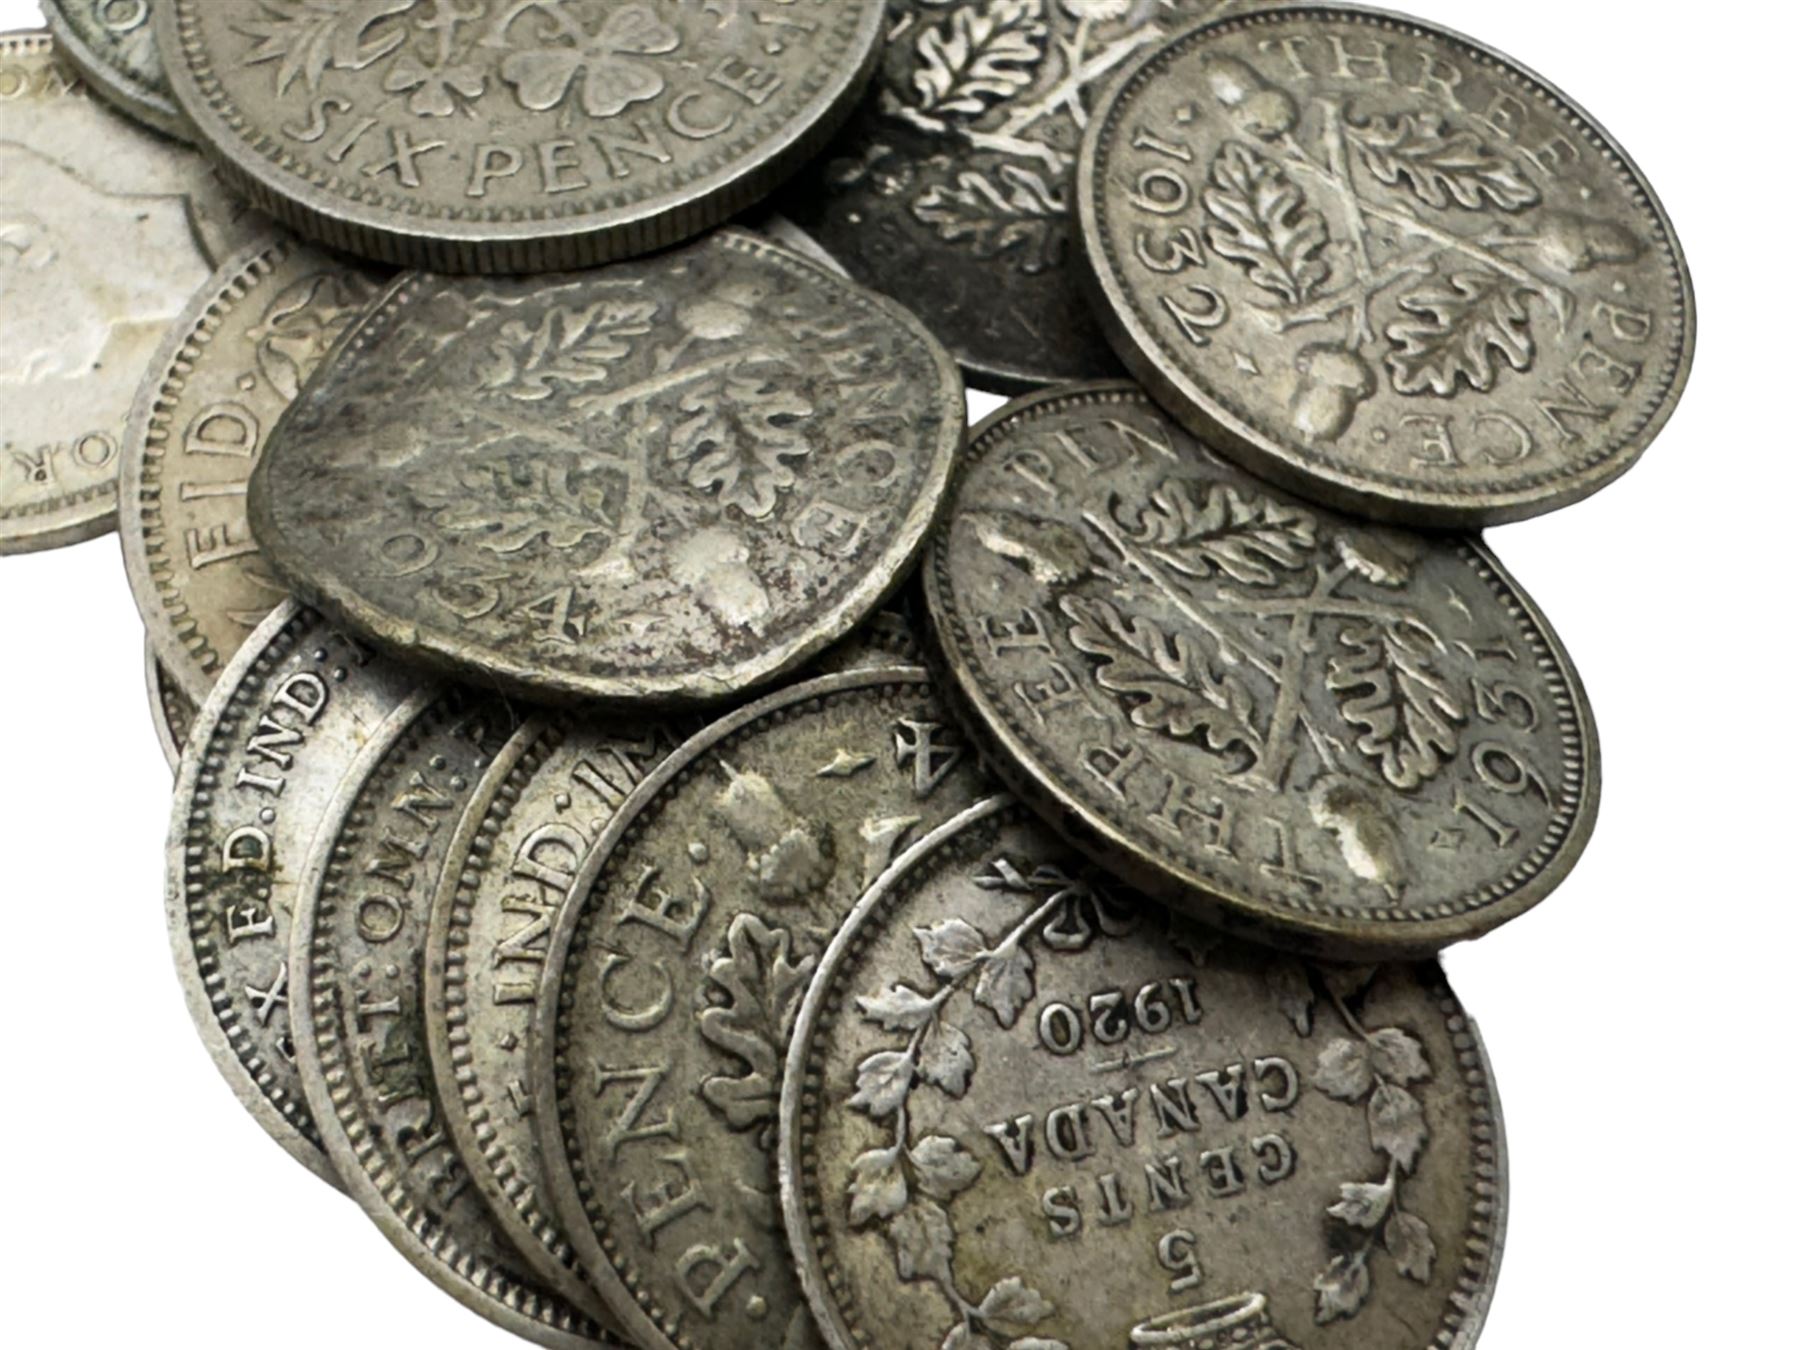 Coins including Elizabeth I 1573 sixpence and other hammered silver coins - Image 4 of 11